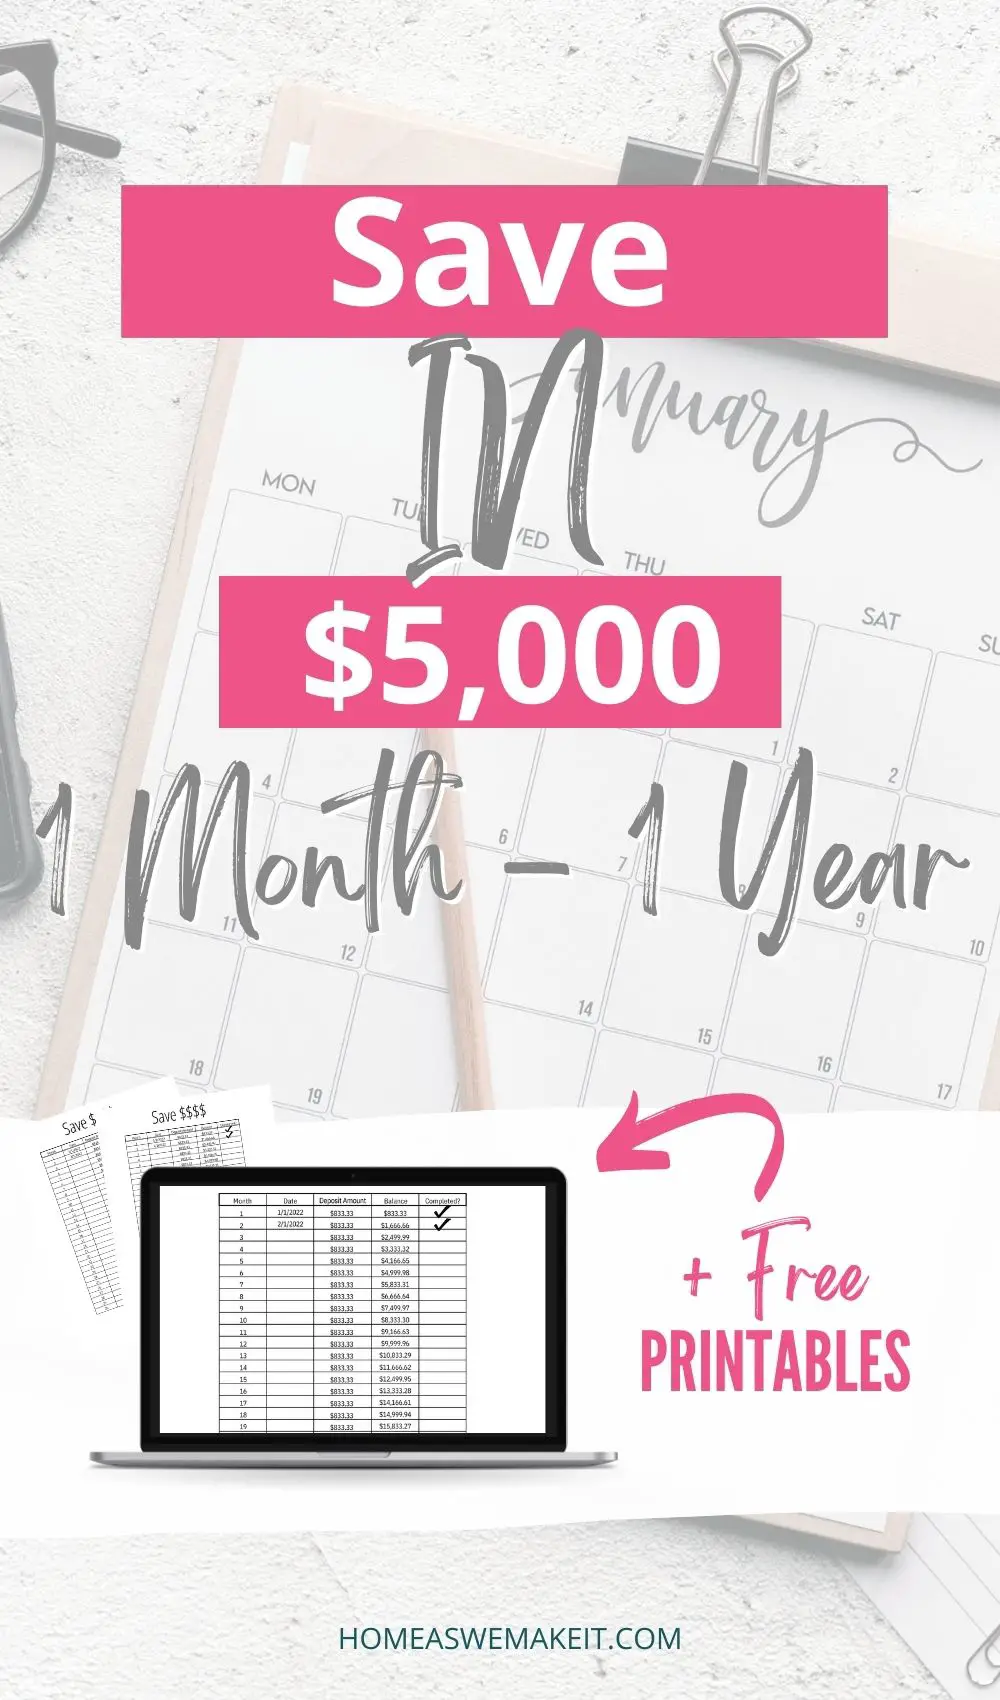 save $5,000 in 1 month - 1 year